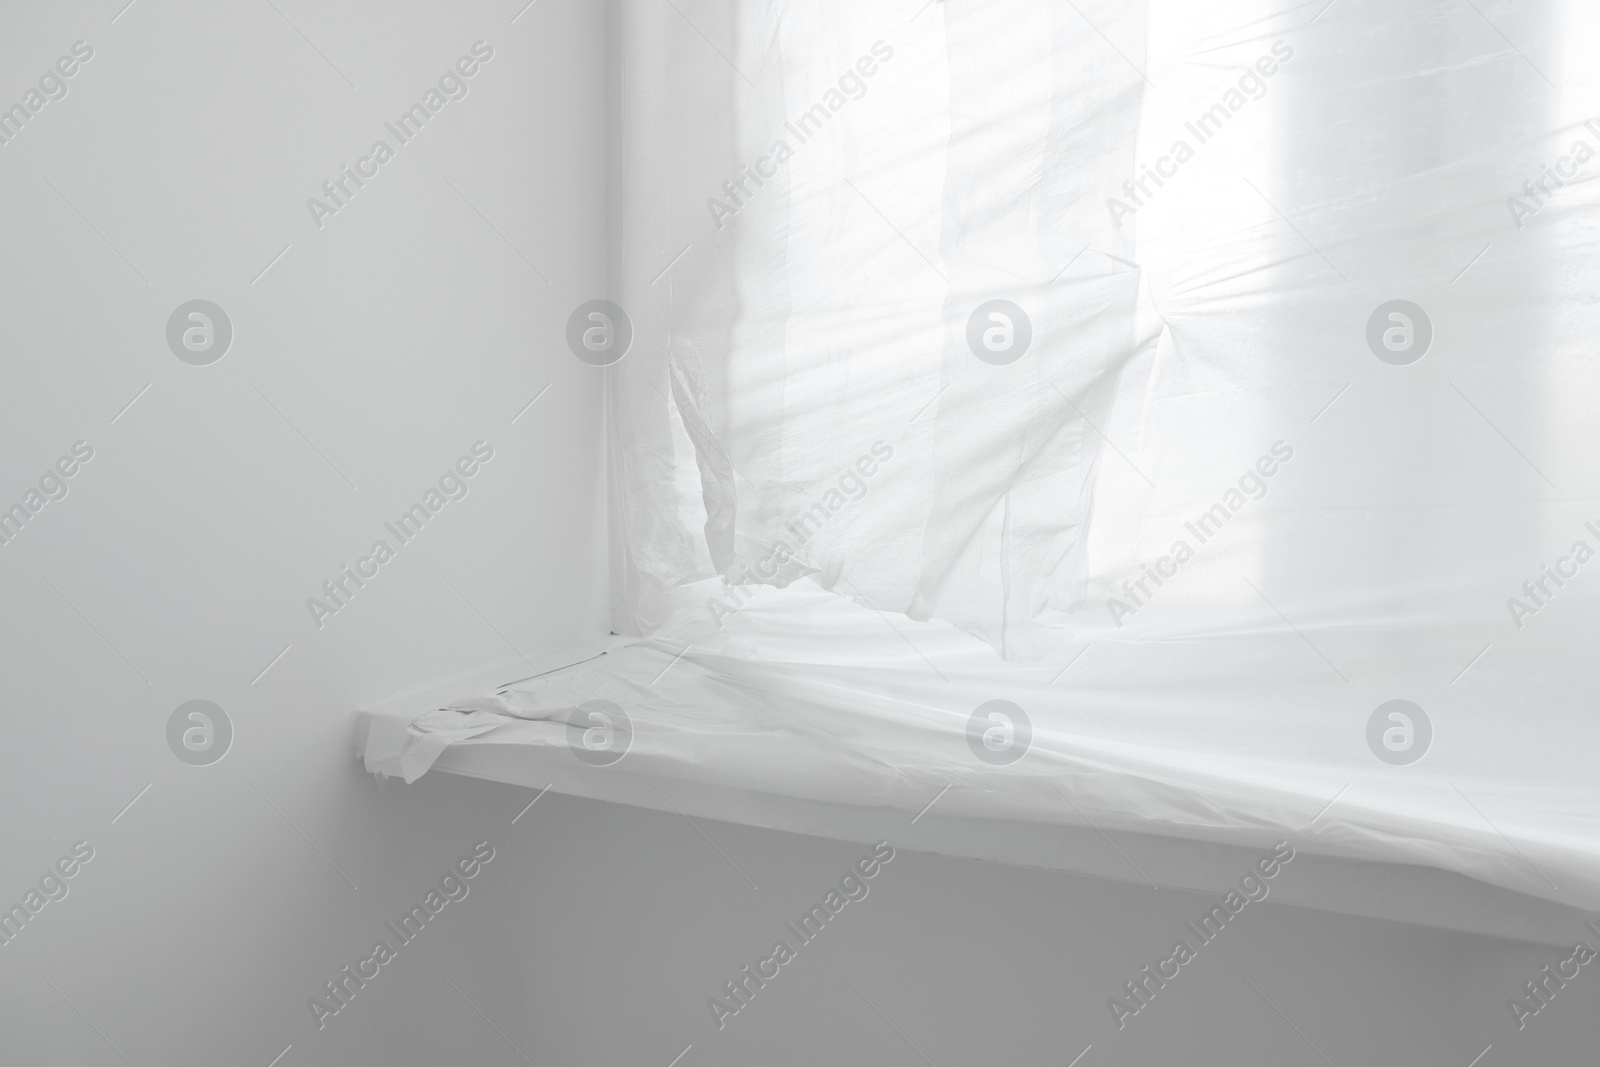 Photo of Window and sill covered with plastic film indoors